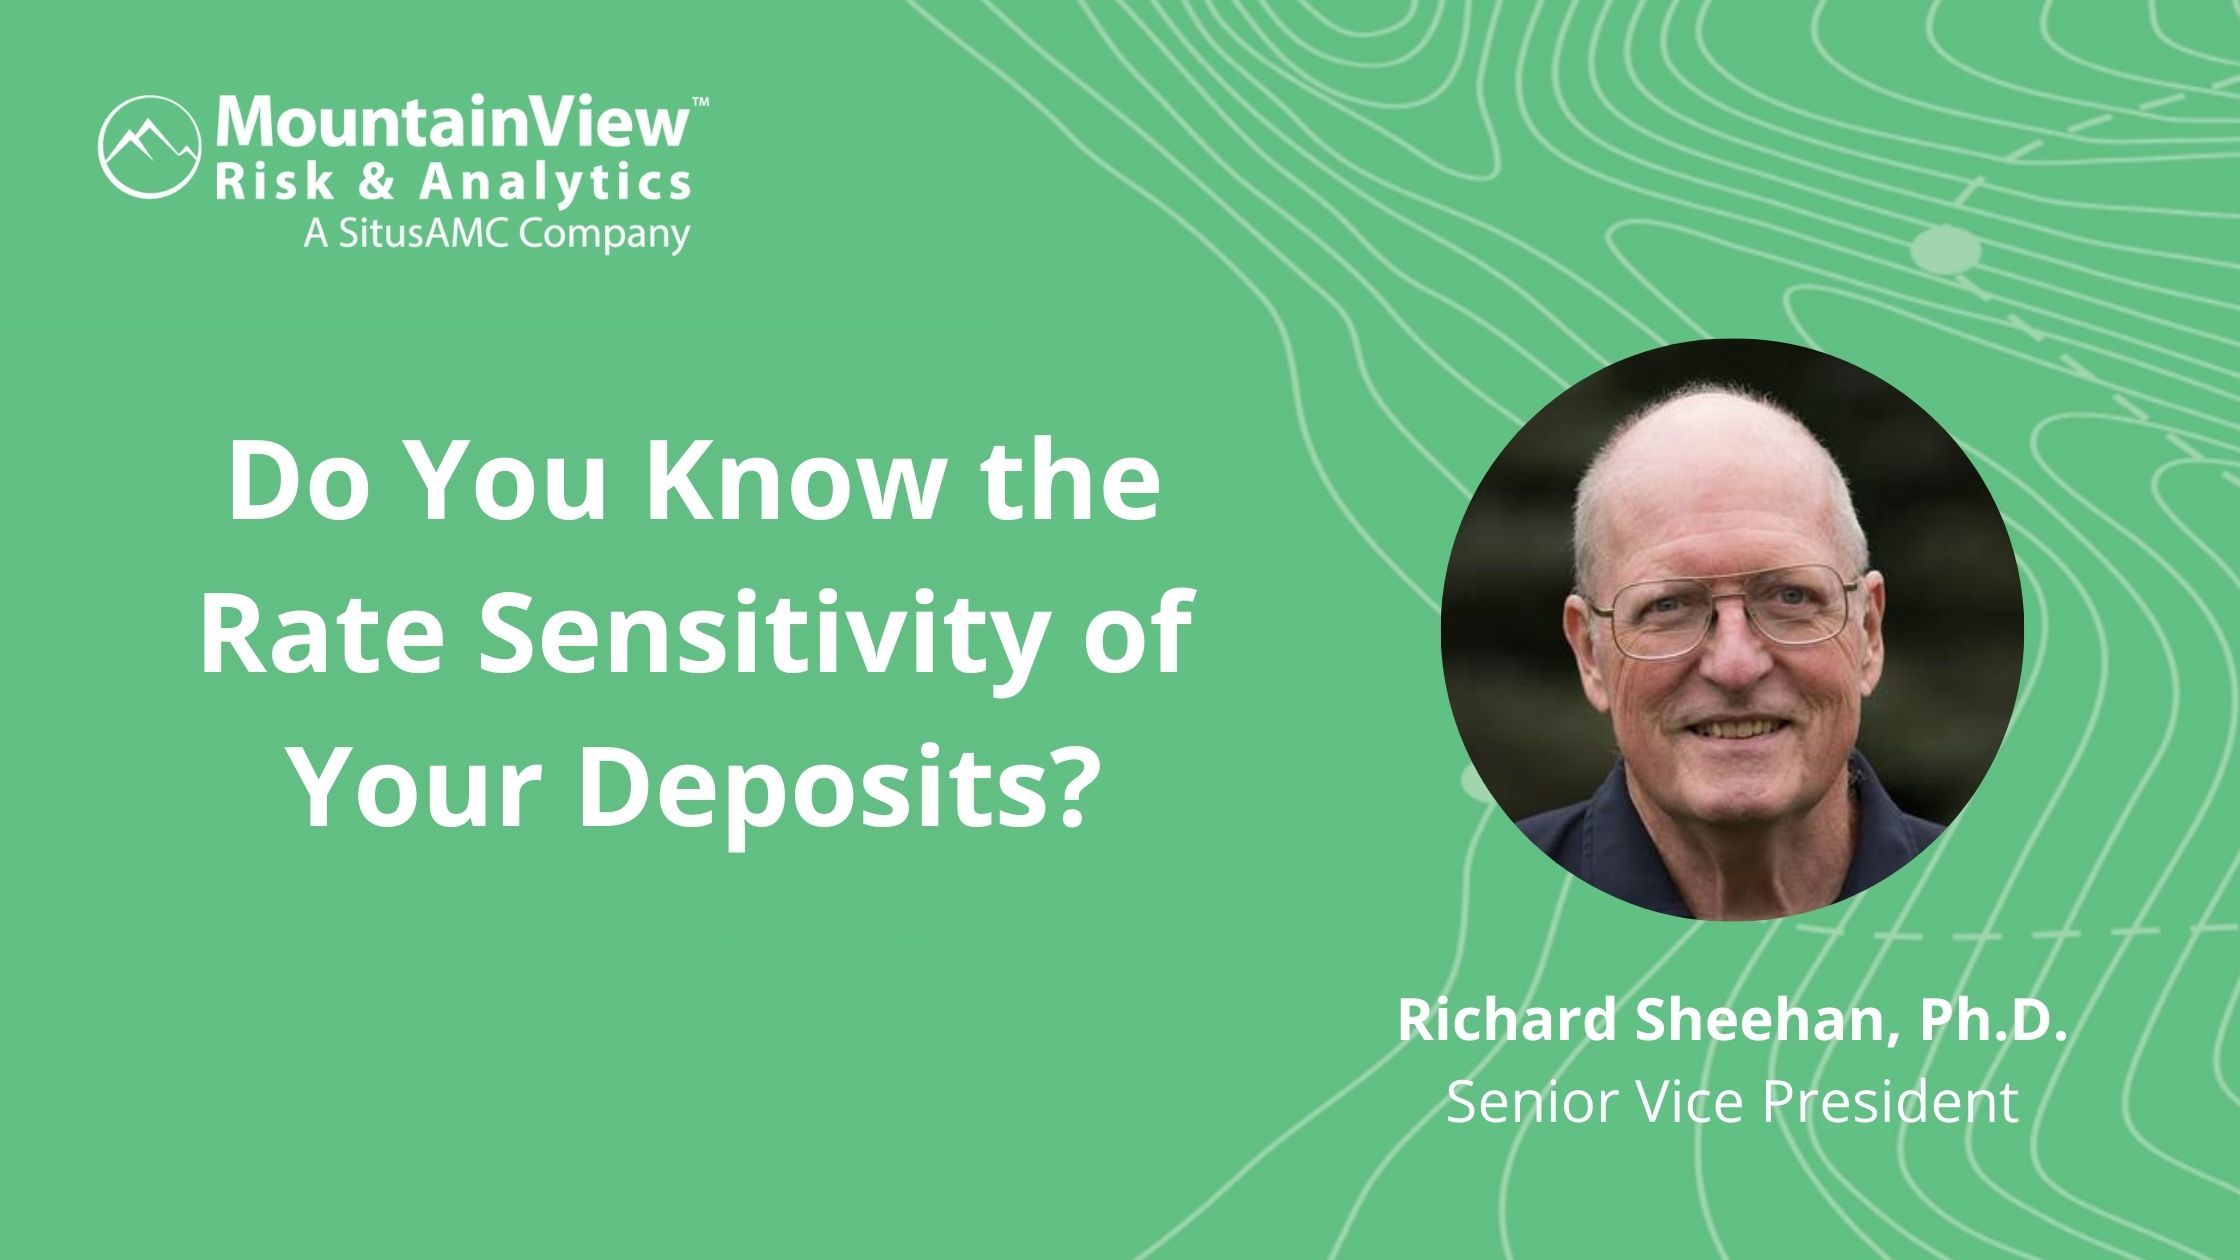 Do You Know the Rate Sensitivity of Your Deposits?